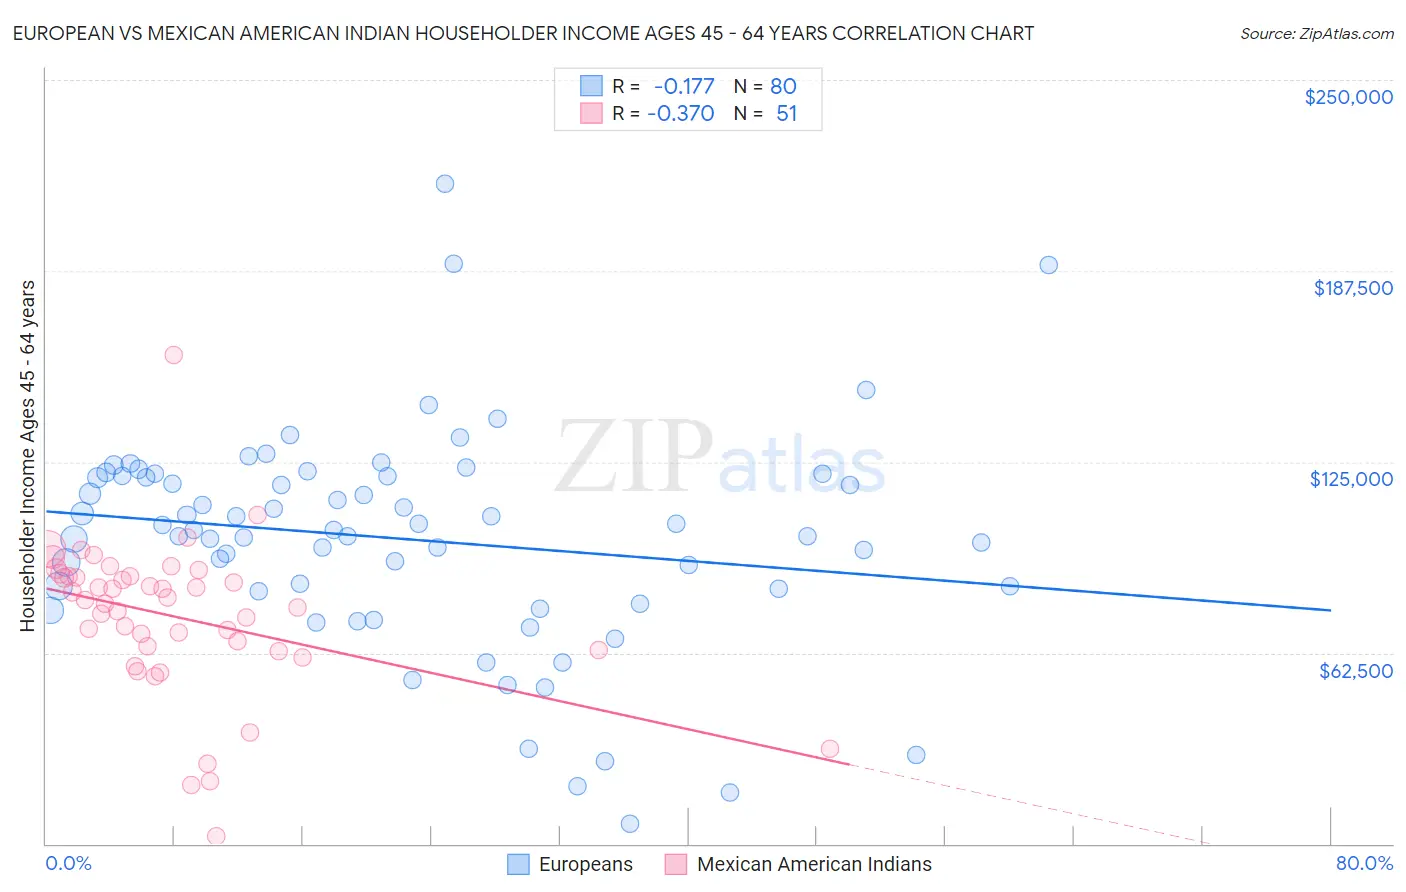 European vs Mexican American Indian Householder Income Ages 45 - 64 years